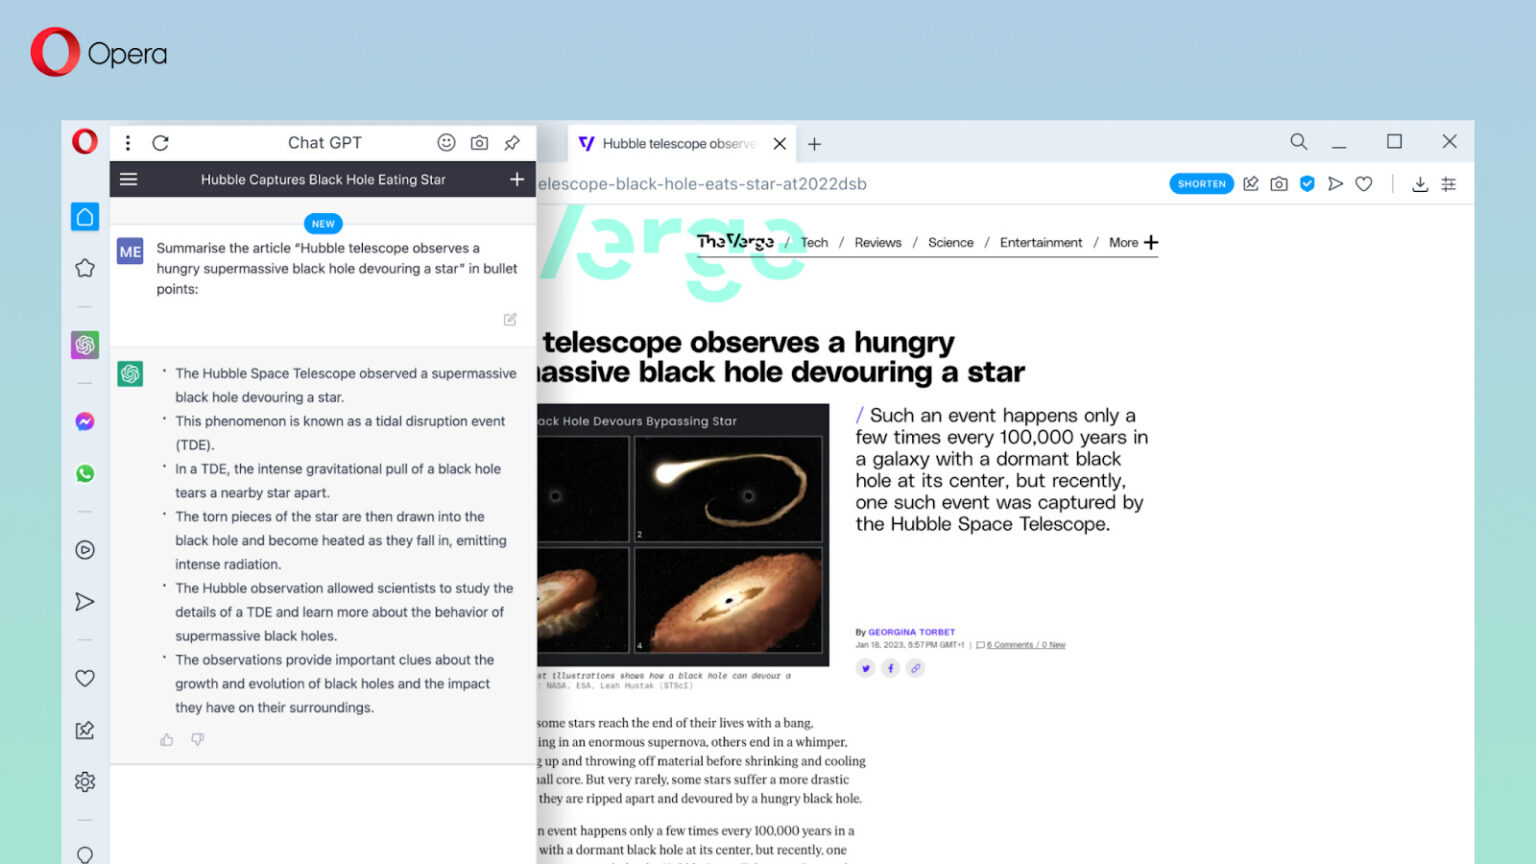 Opera gets ChatGPT-powered AI tool called ‘Shorten’ to summarize articles